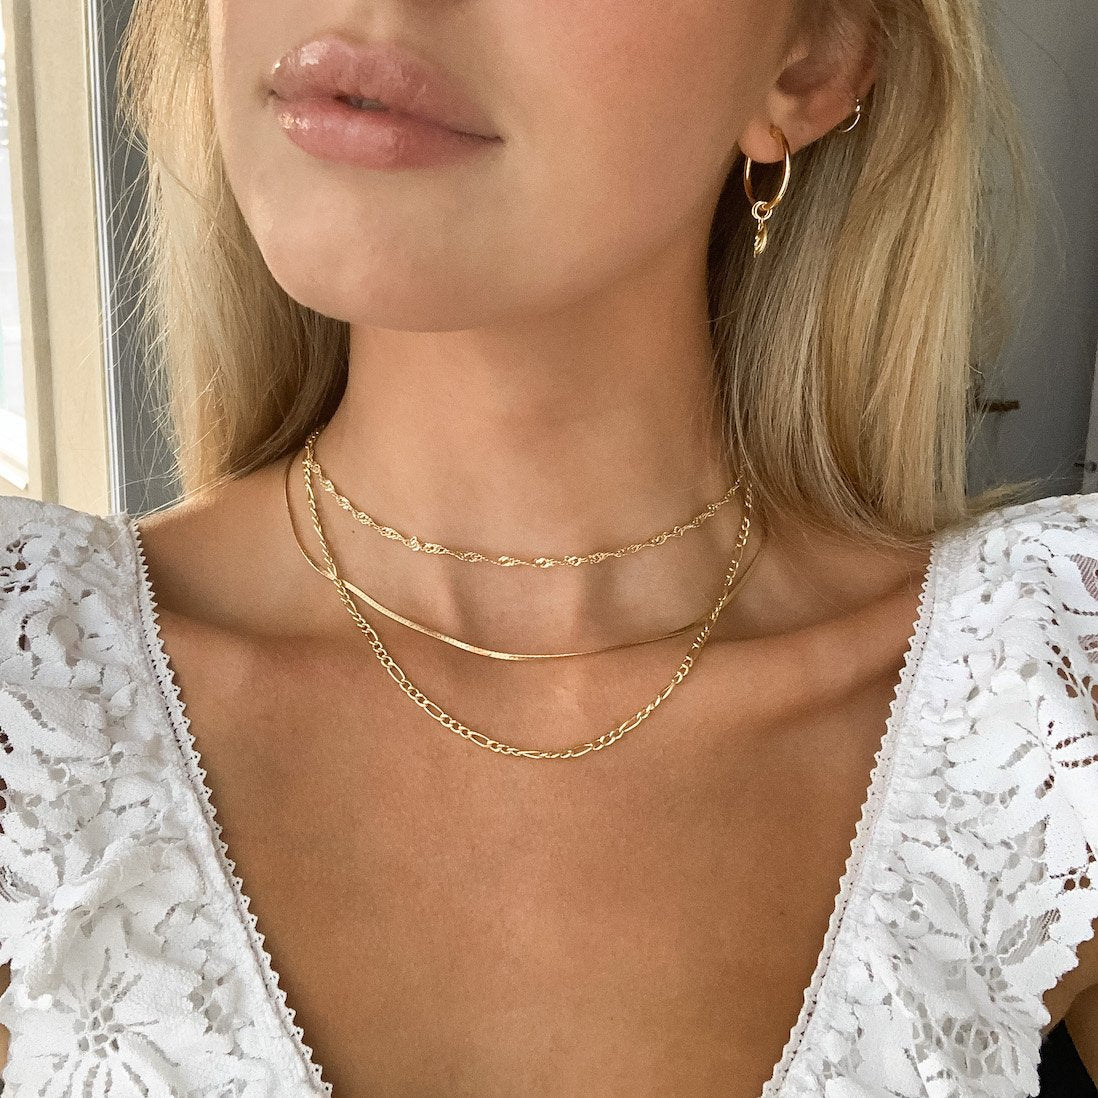 14k gold necklace chains layered style kemmi collection jewelry boho chic